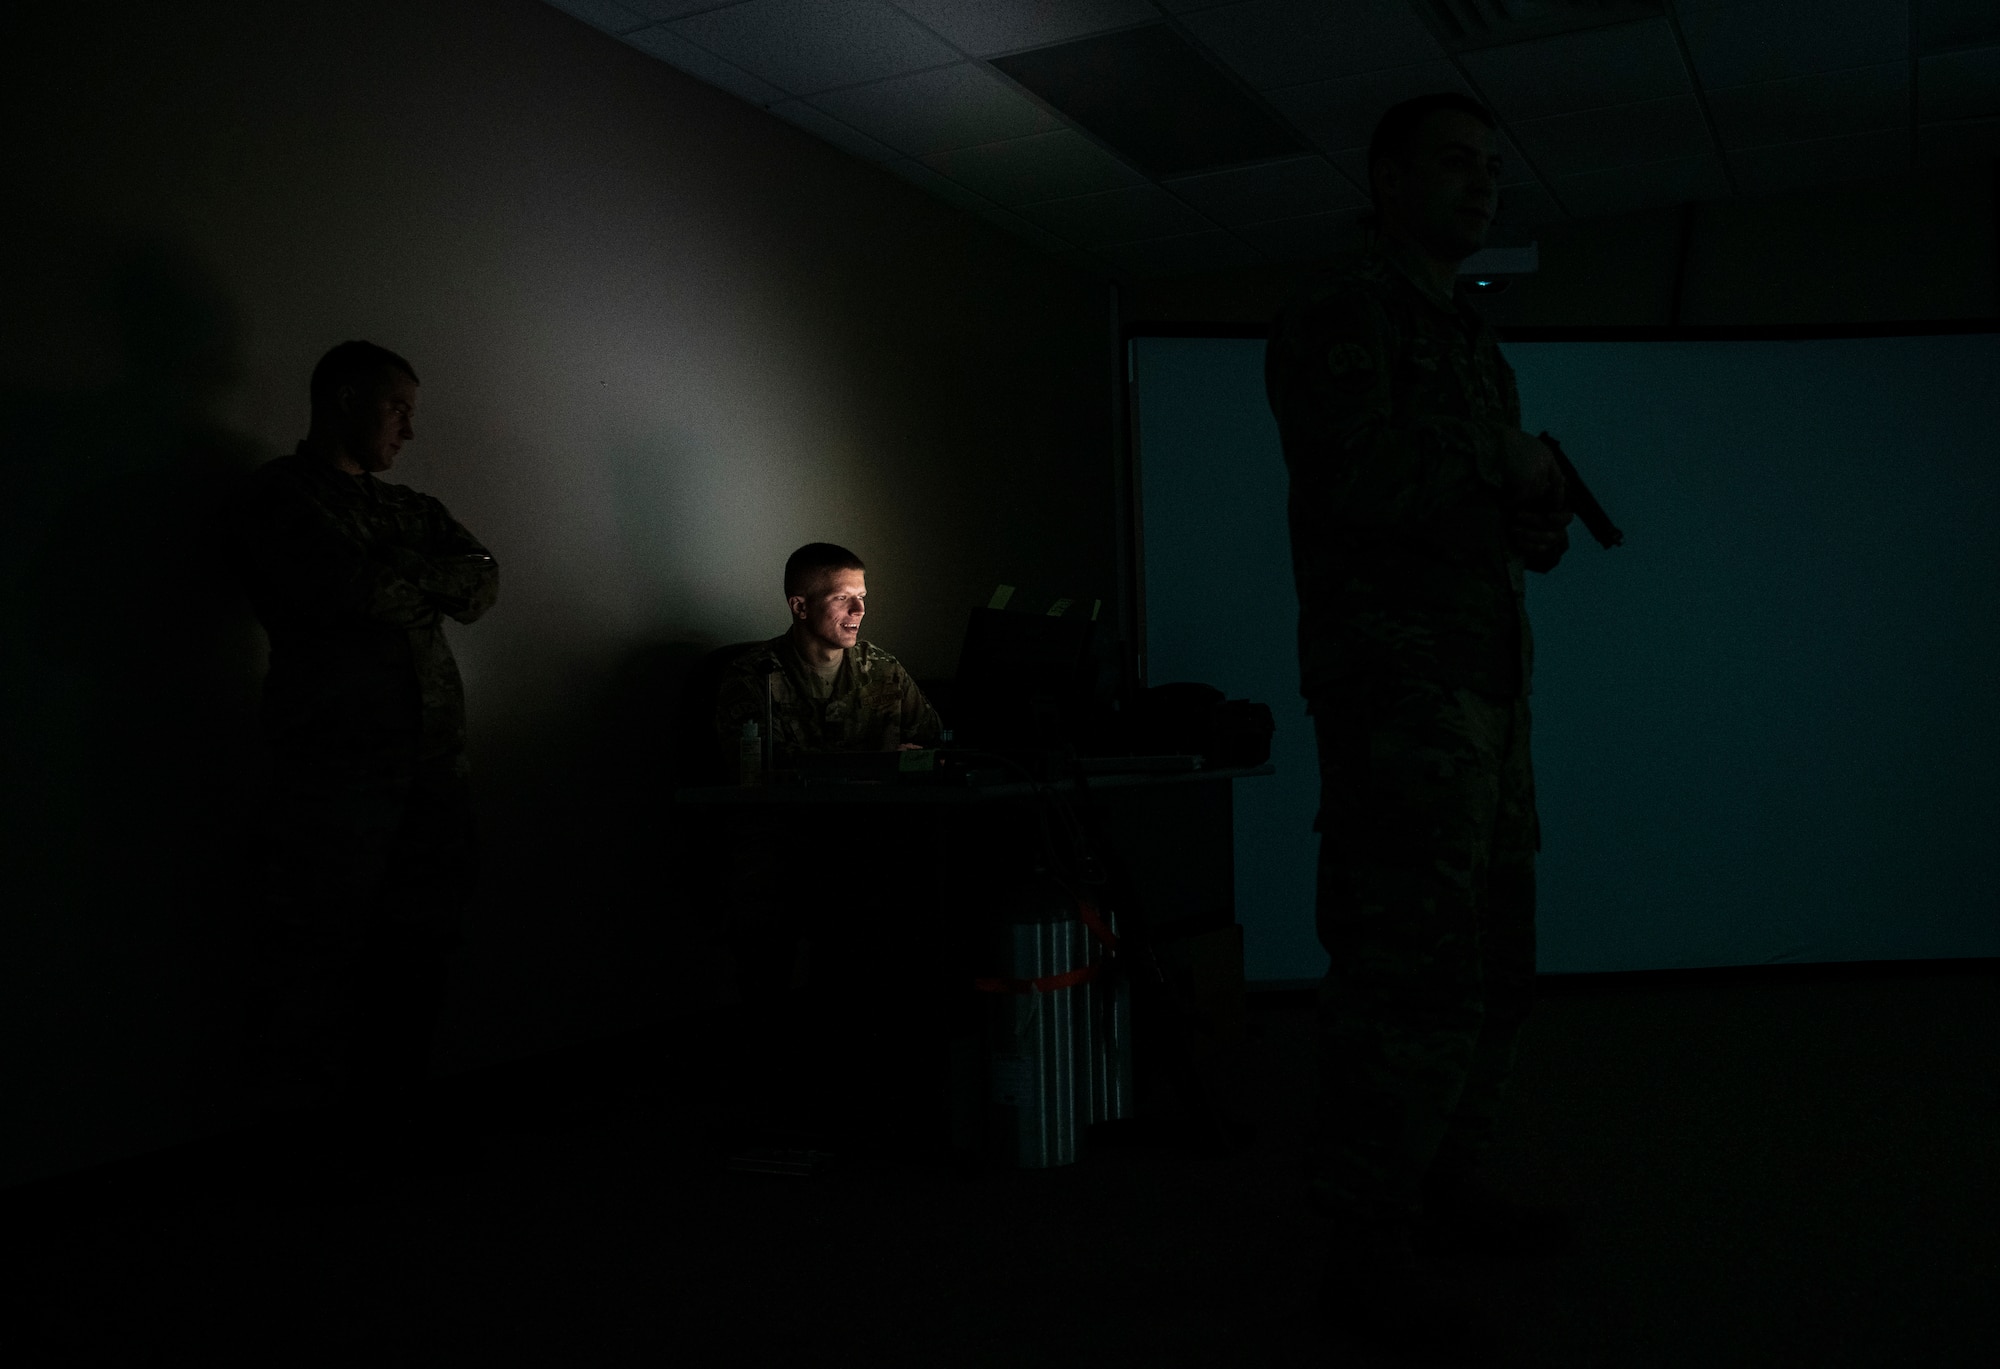 U.S. Air Force Staff Sgt. Michael McDowell, 325th Security Forces Squadron standards and evaluations evaluator (center), prepares a training scenario for Staff Sgt. Thomas Badders, 325th SFS noncommissioned officer in charge of confinement, at Tyndall Air Force Base, Florida, Feb. 5, 2020. Security Forces uses the Multiple Interactive Learning/Training Objectives Range to train for real-world situations. (U.S. Air Force photo by Senior Airman Stefan Alvarez)